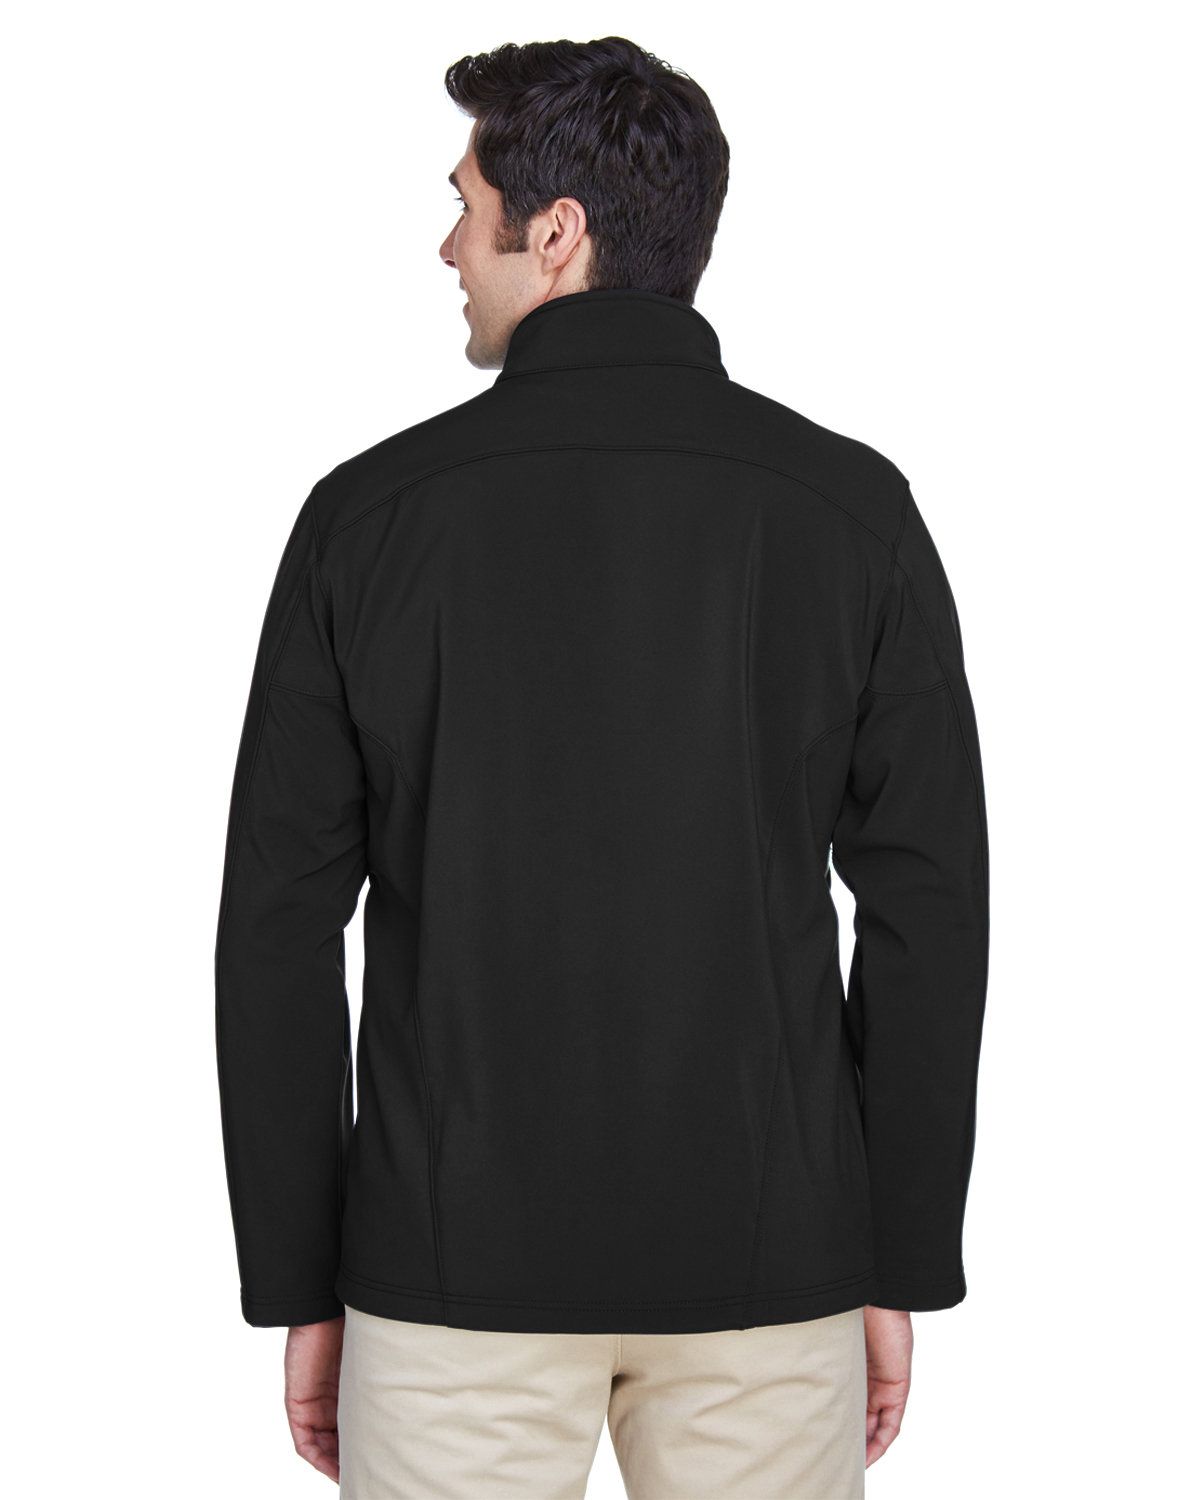 'Ash City - Core 365 88184T Men's Tall Cruise Two-Layer Fleece Bonded Soft Shell Jacket'